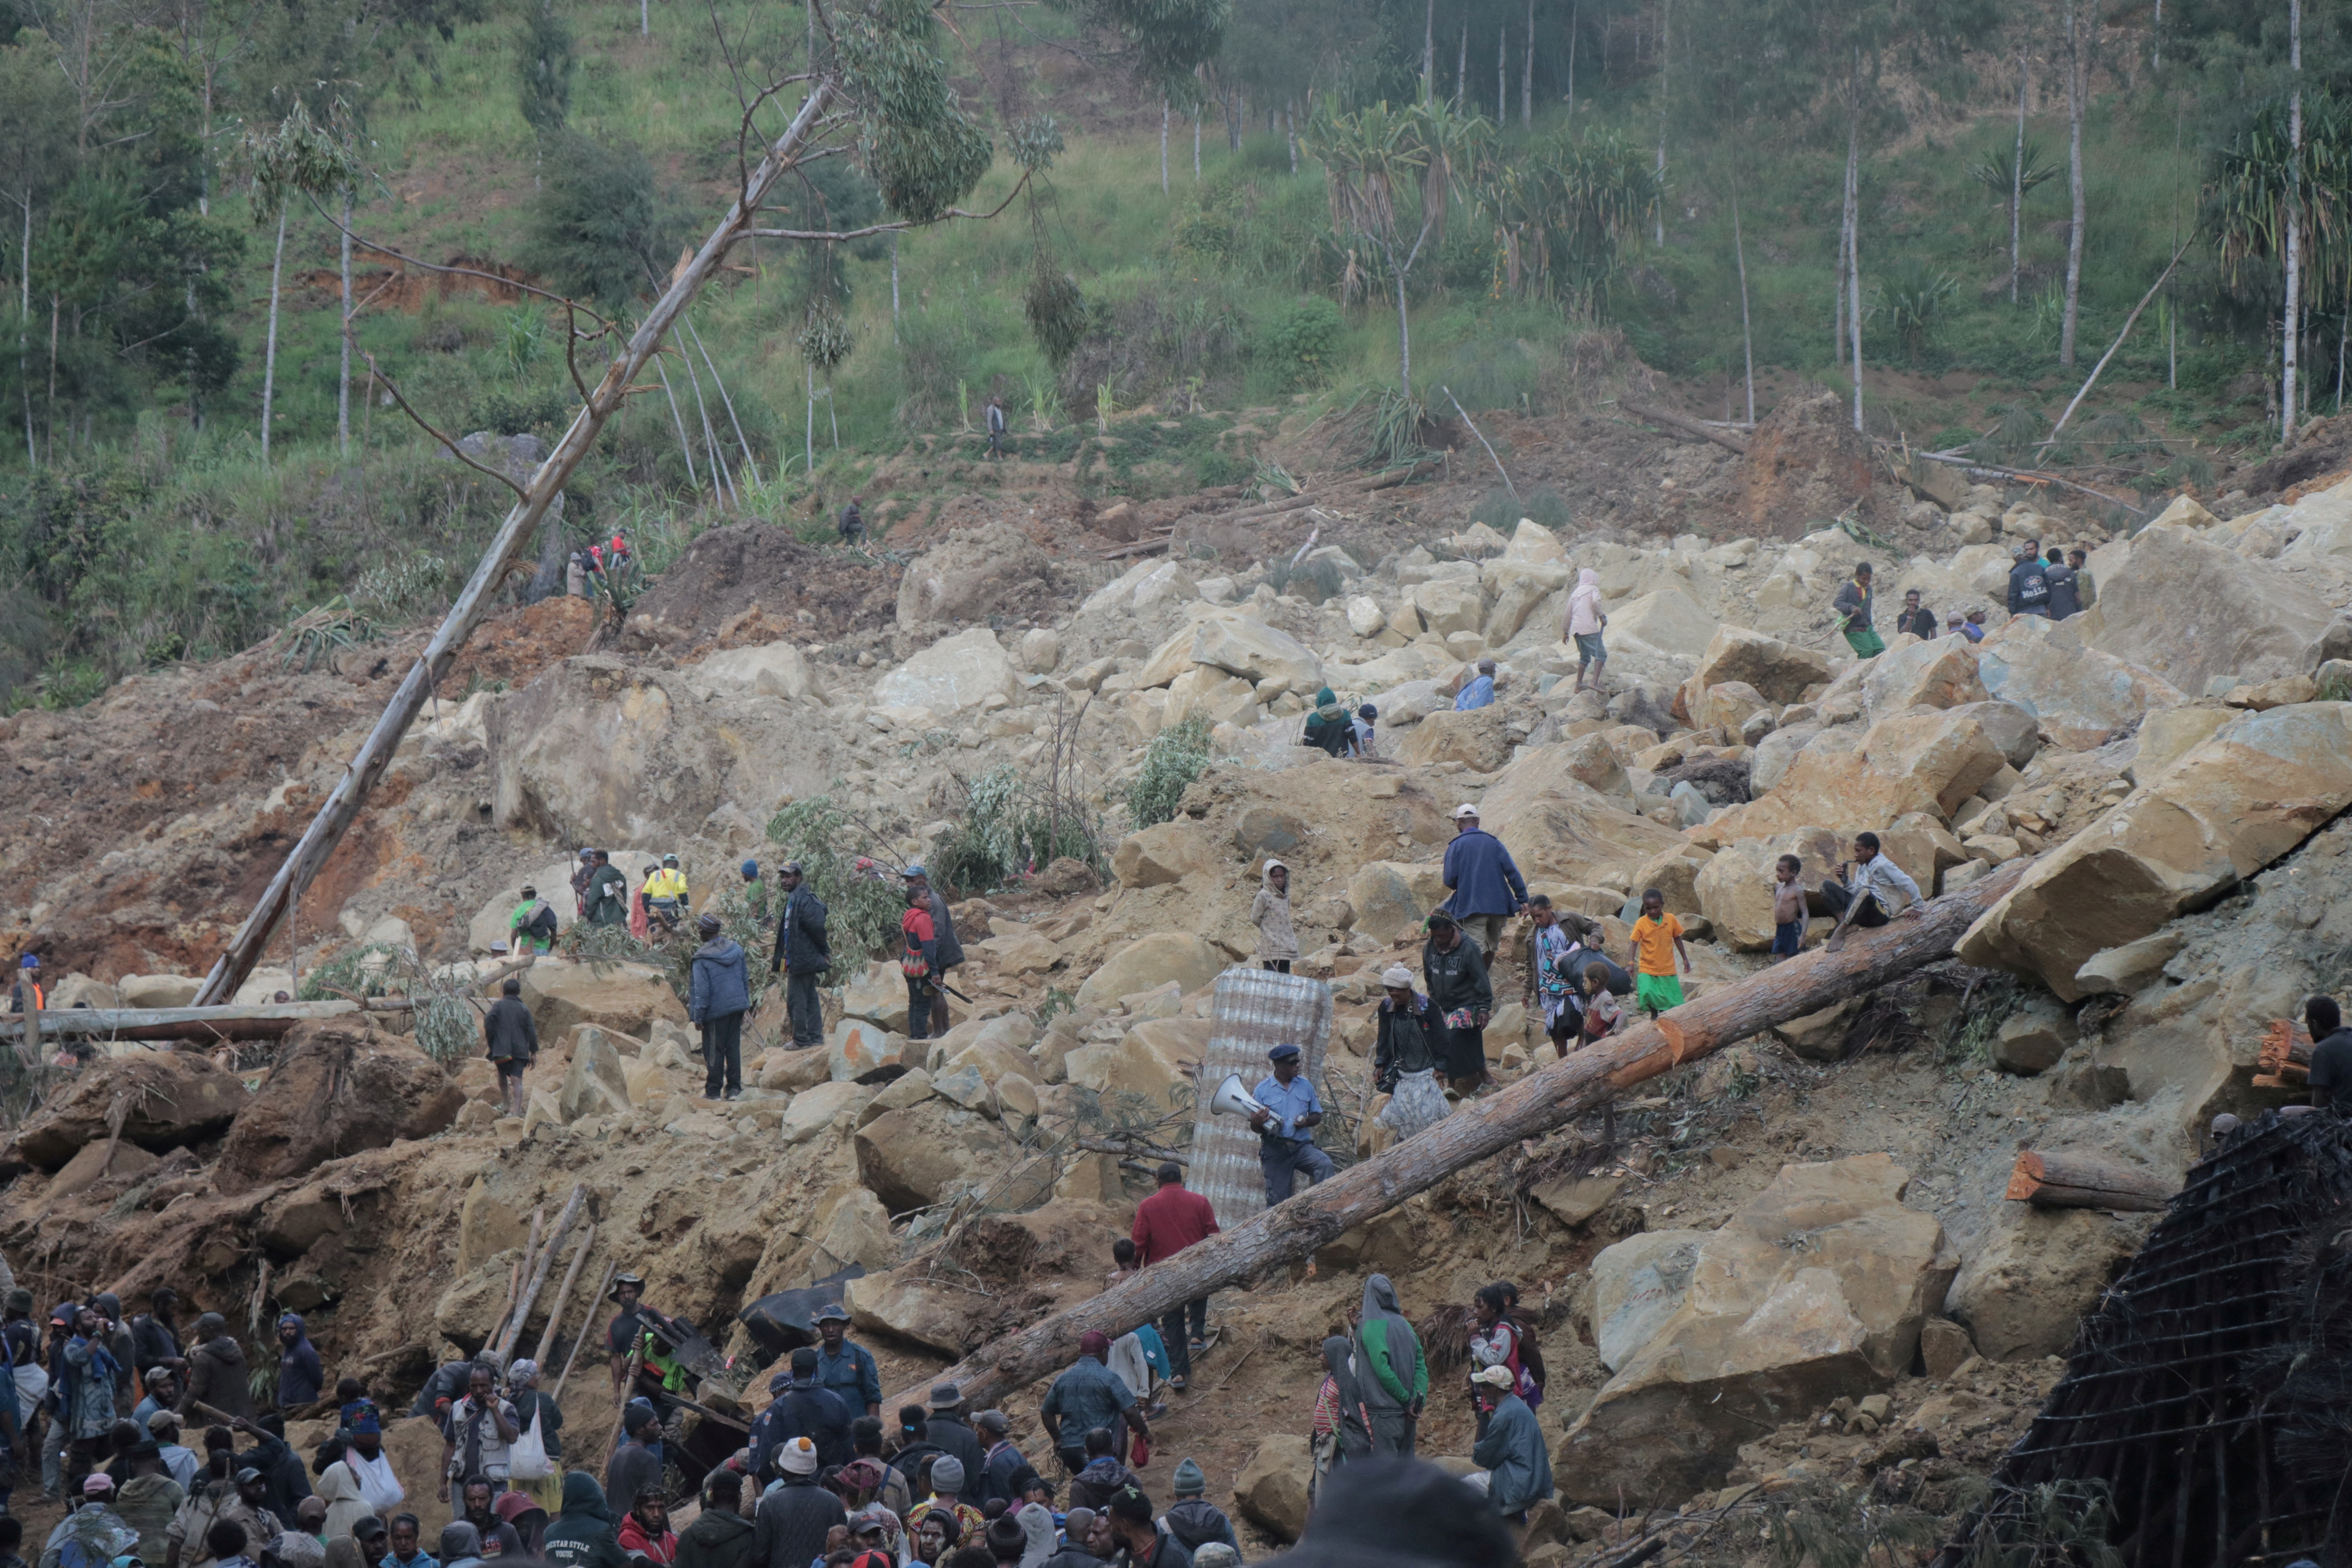 More than 2,000 could be buried in Papua New Guinea landslide